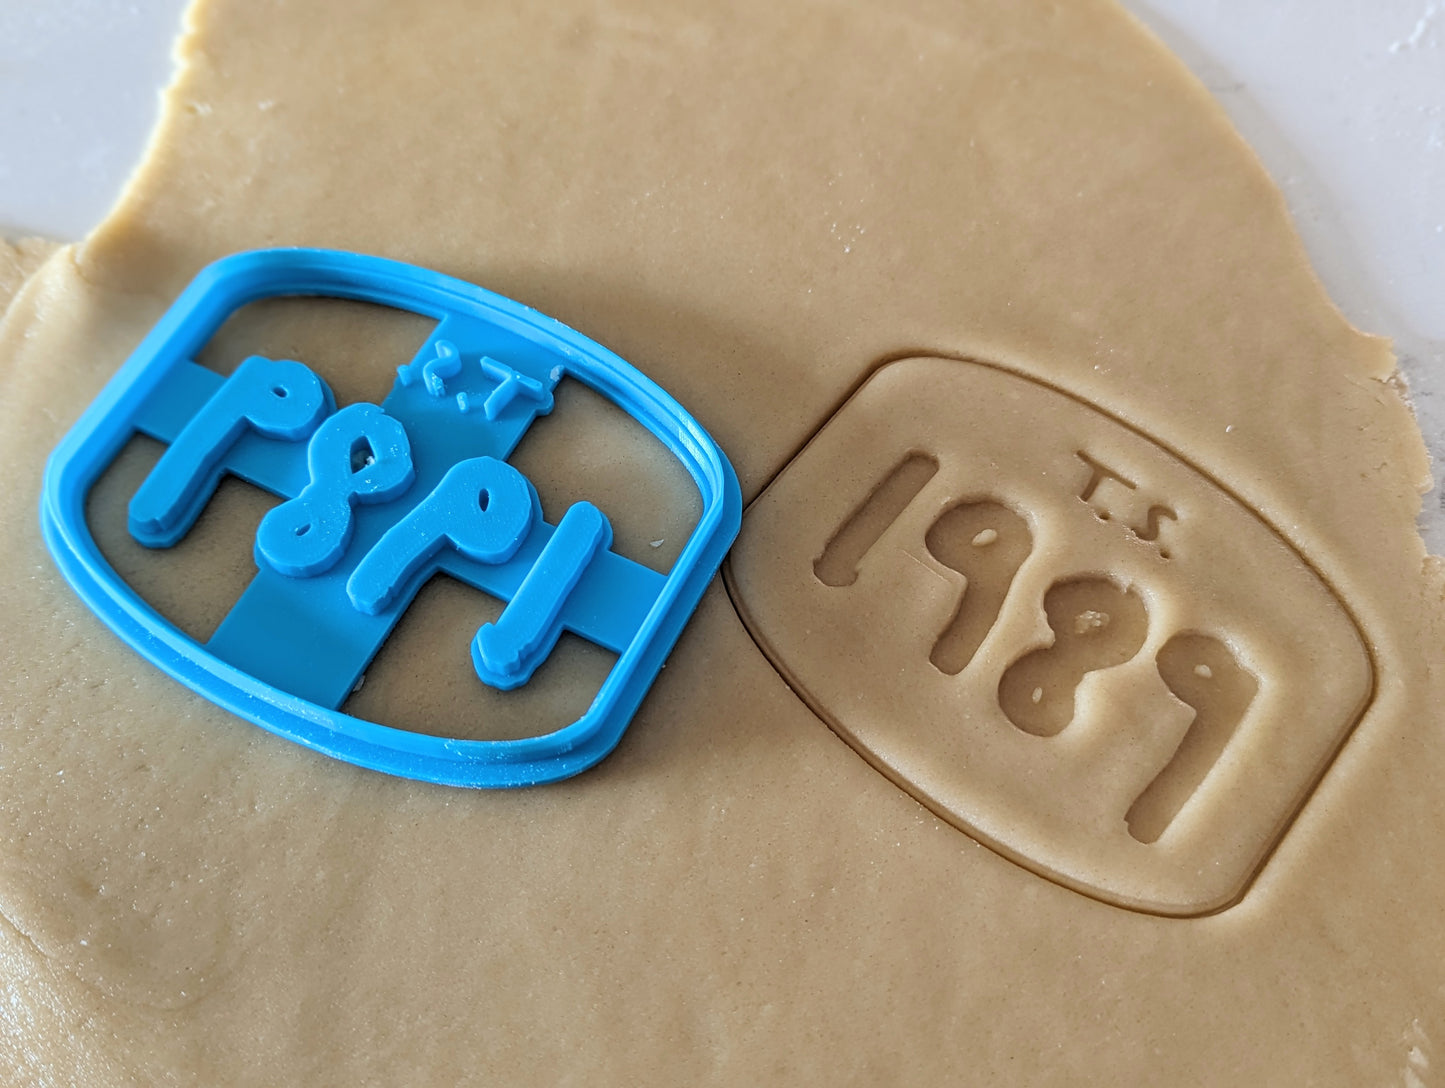 Taylor Swift 1989 cookie cutter